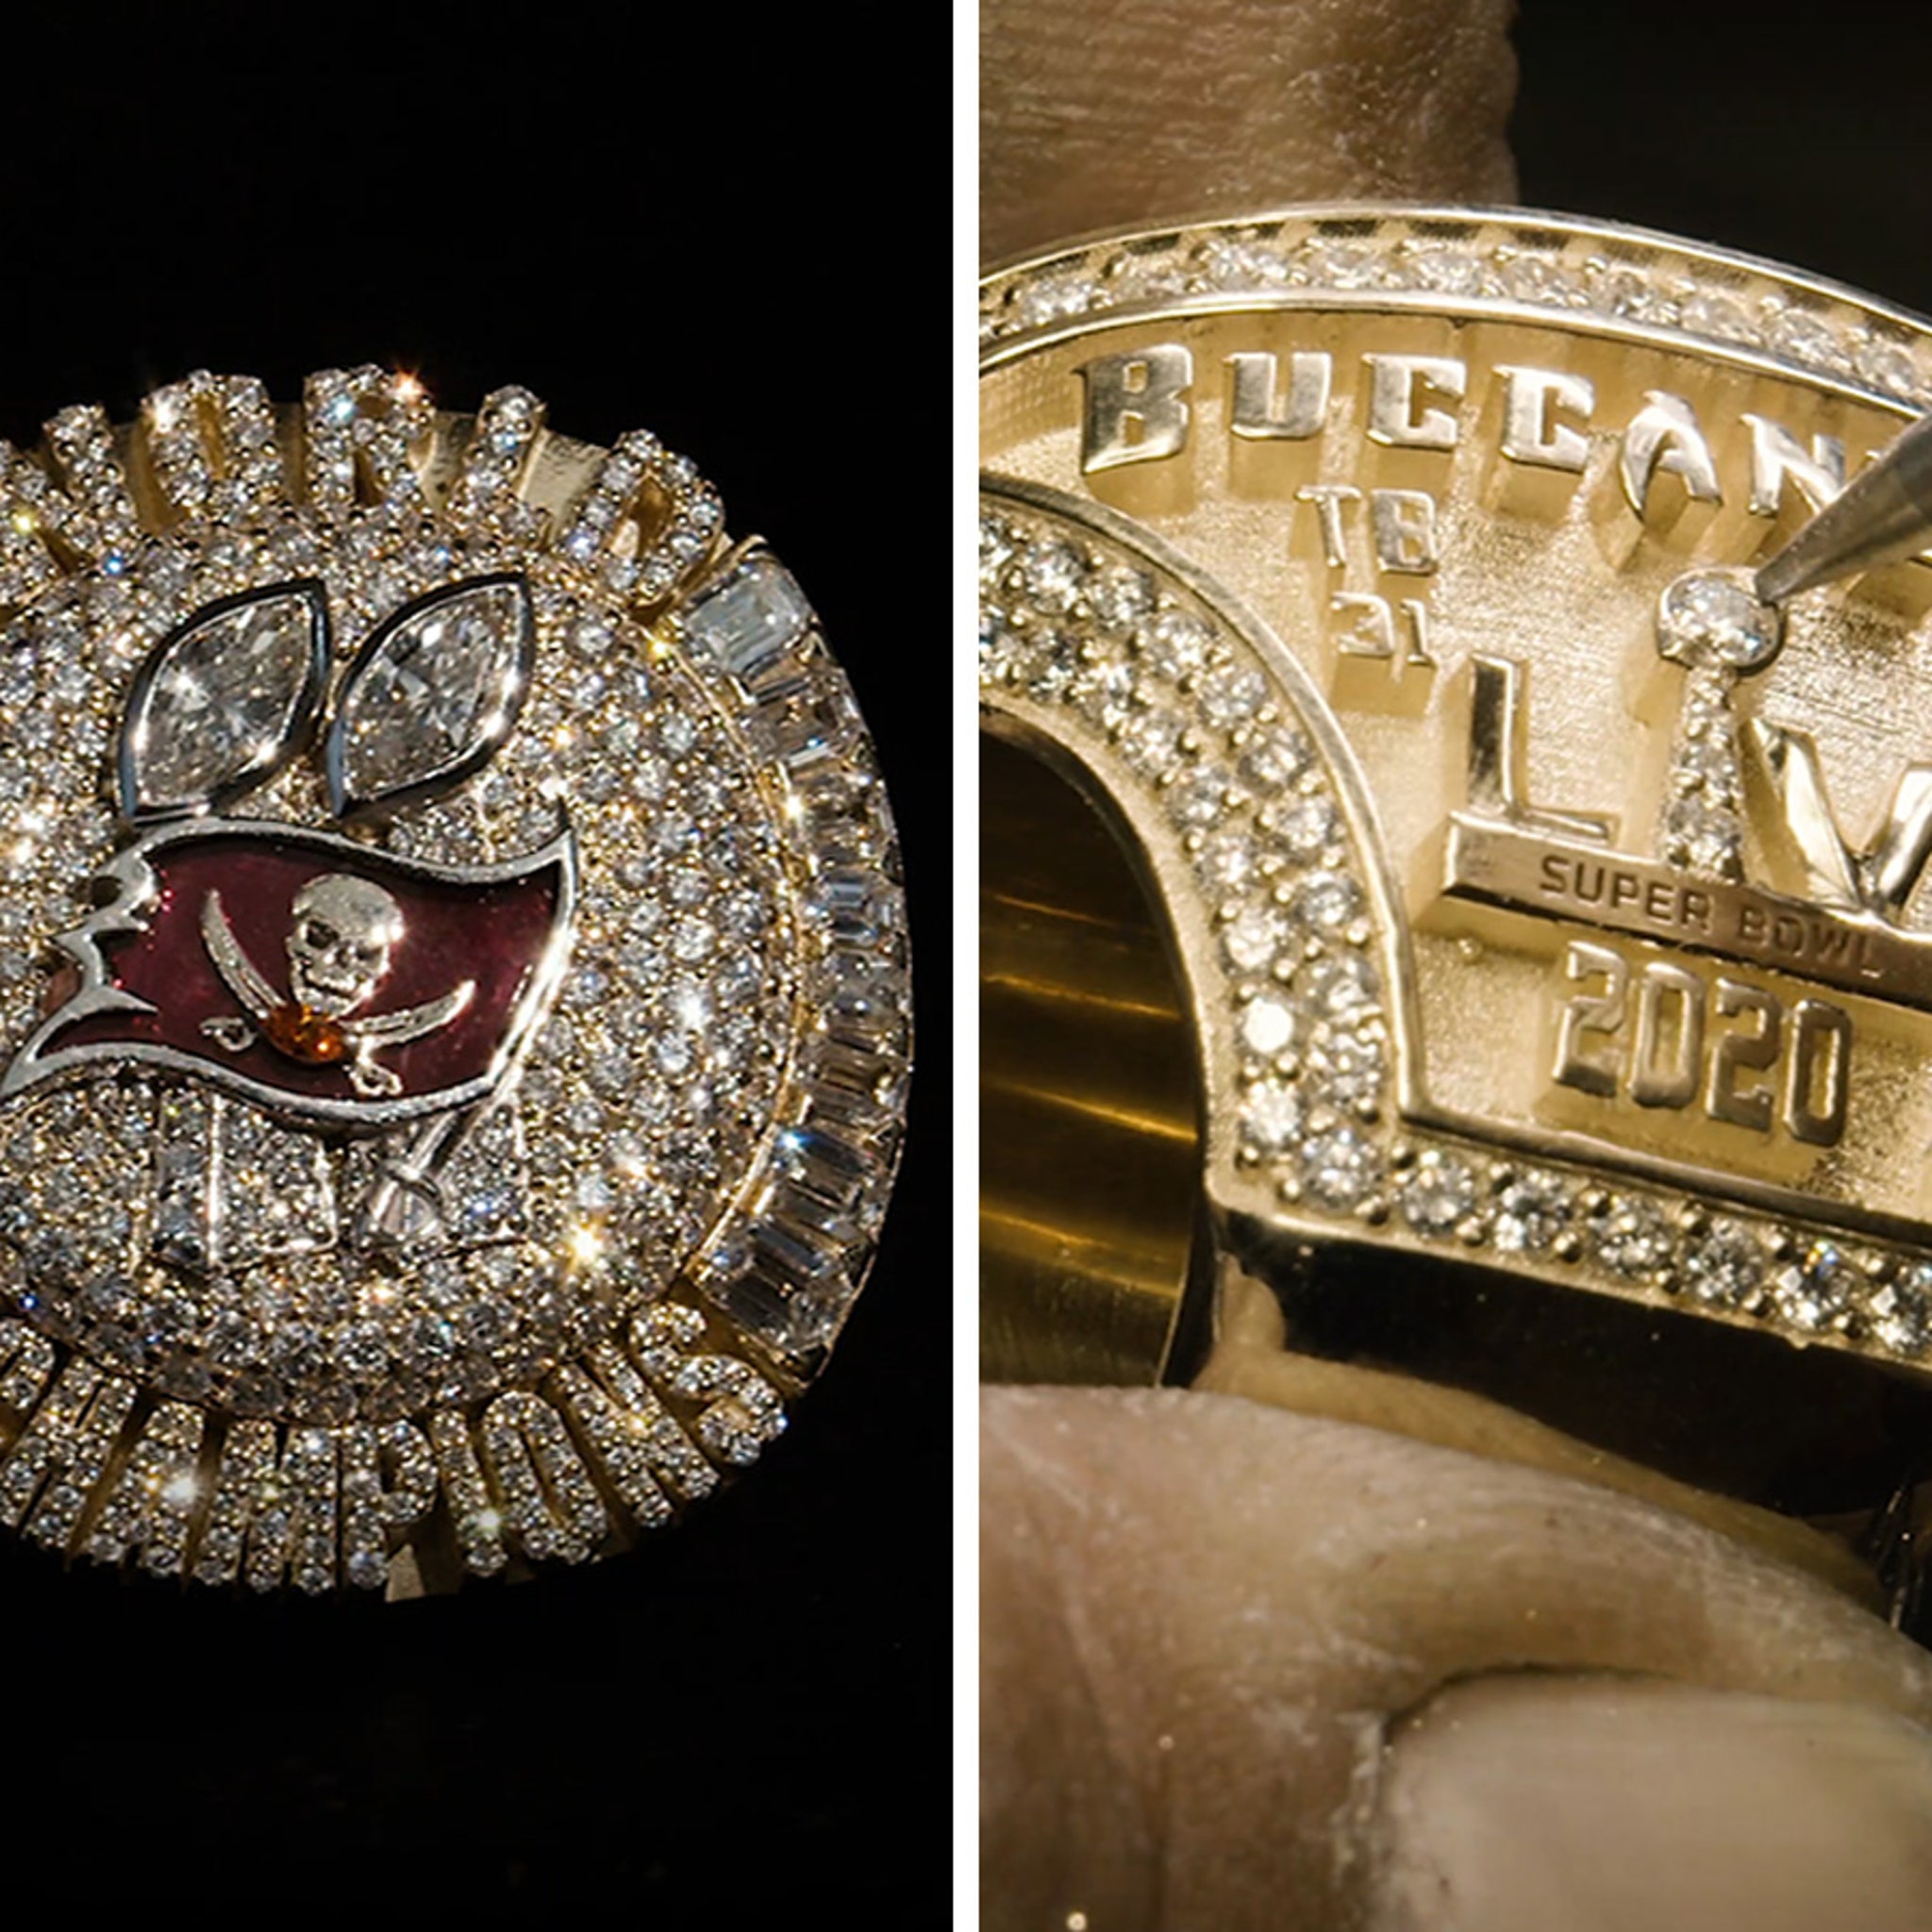 Buccaneers' Super Bowl Rings Feature Removable Top With 319 Diamonds!